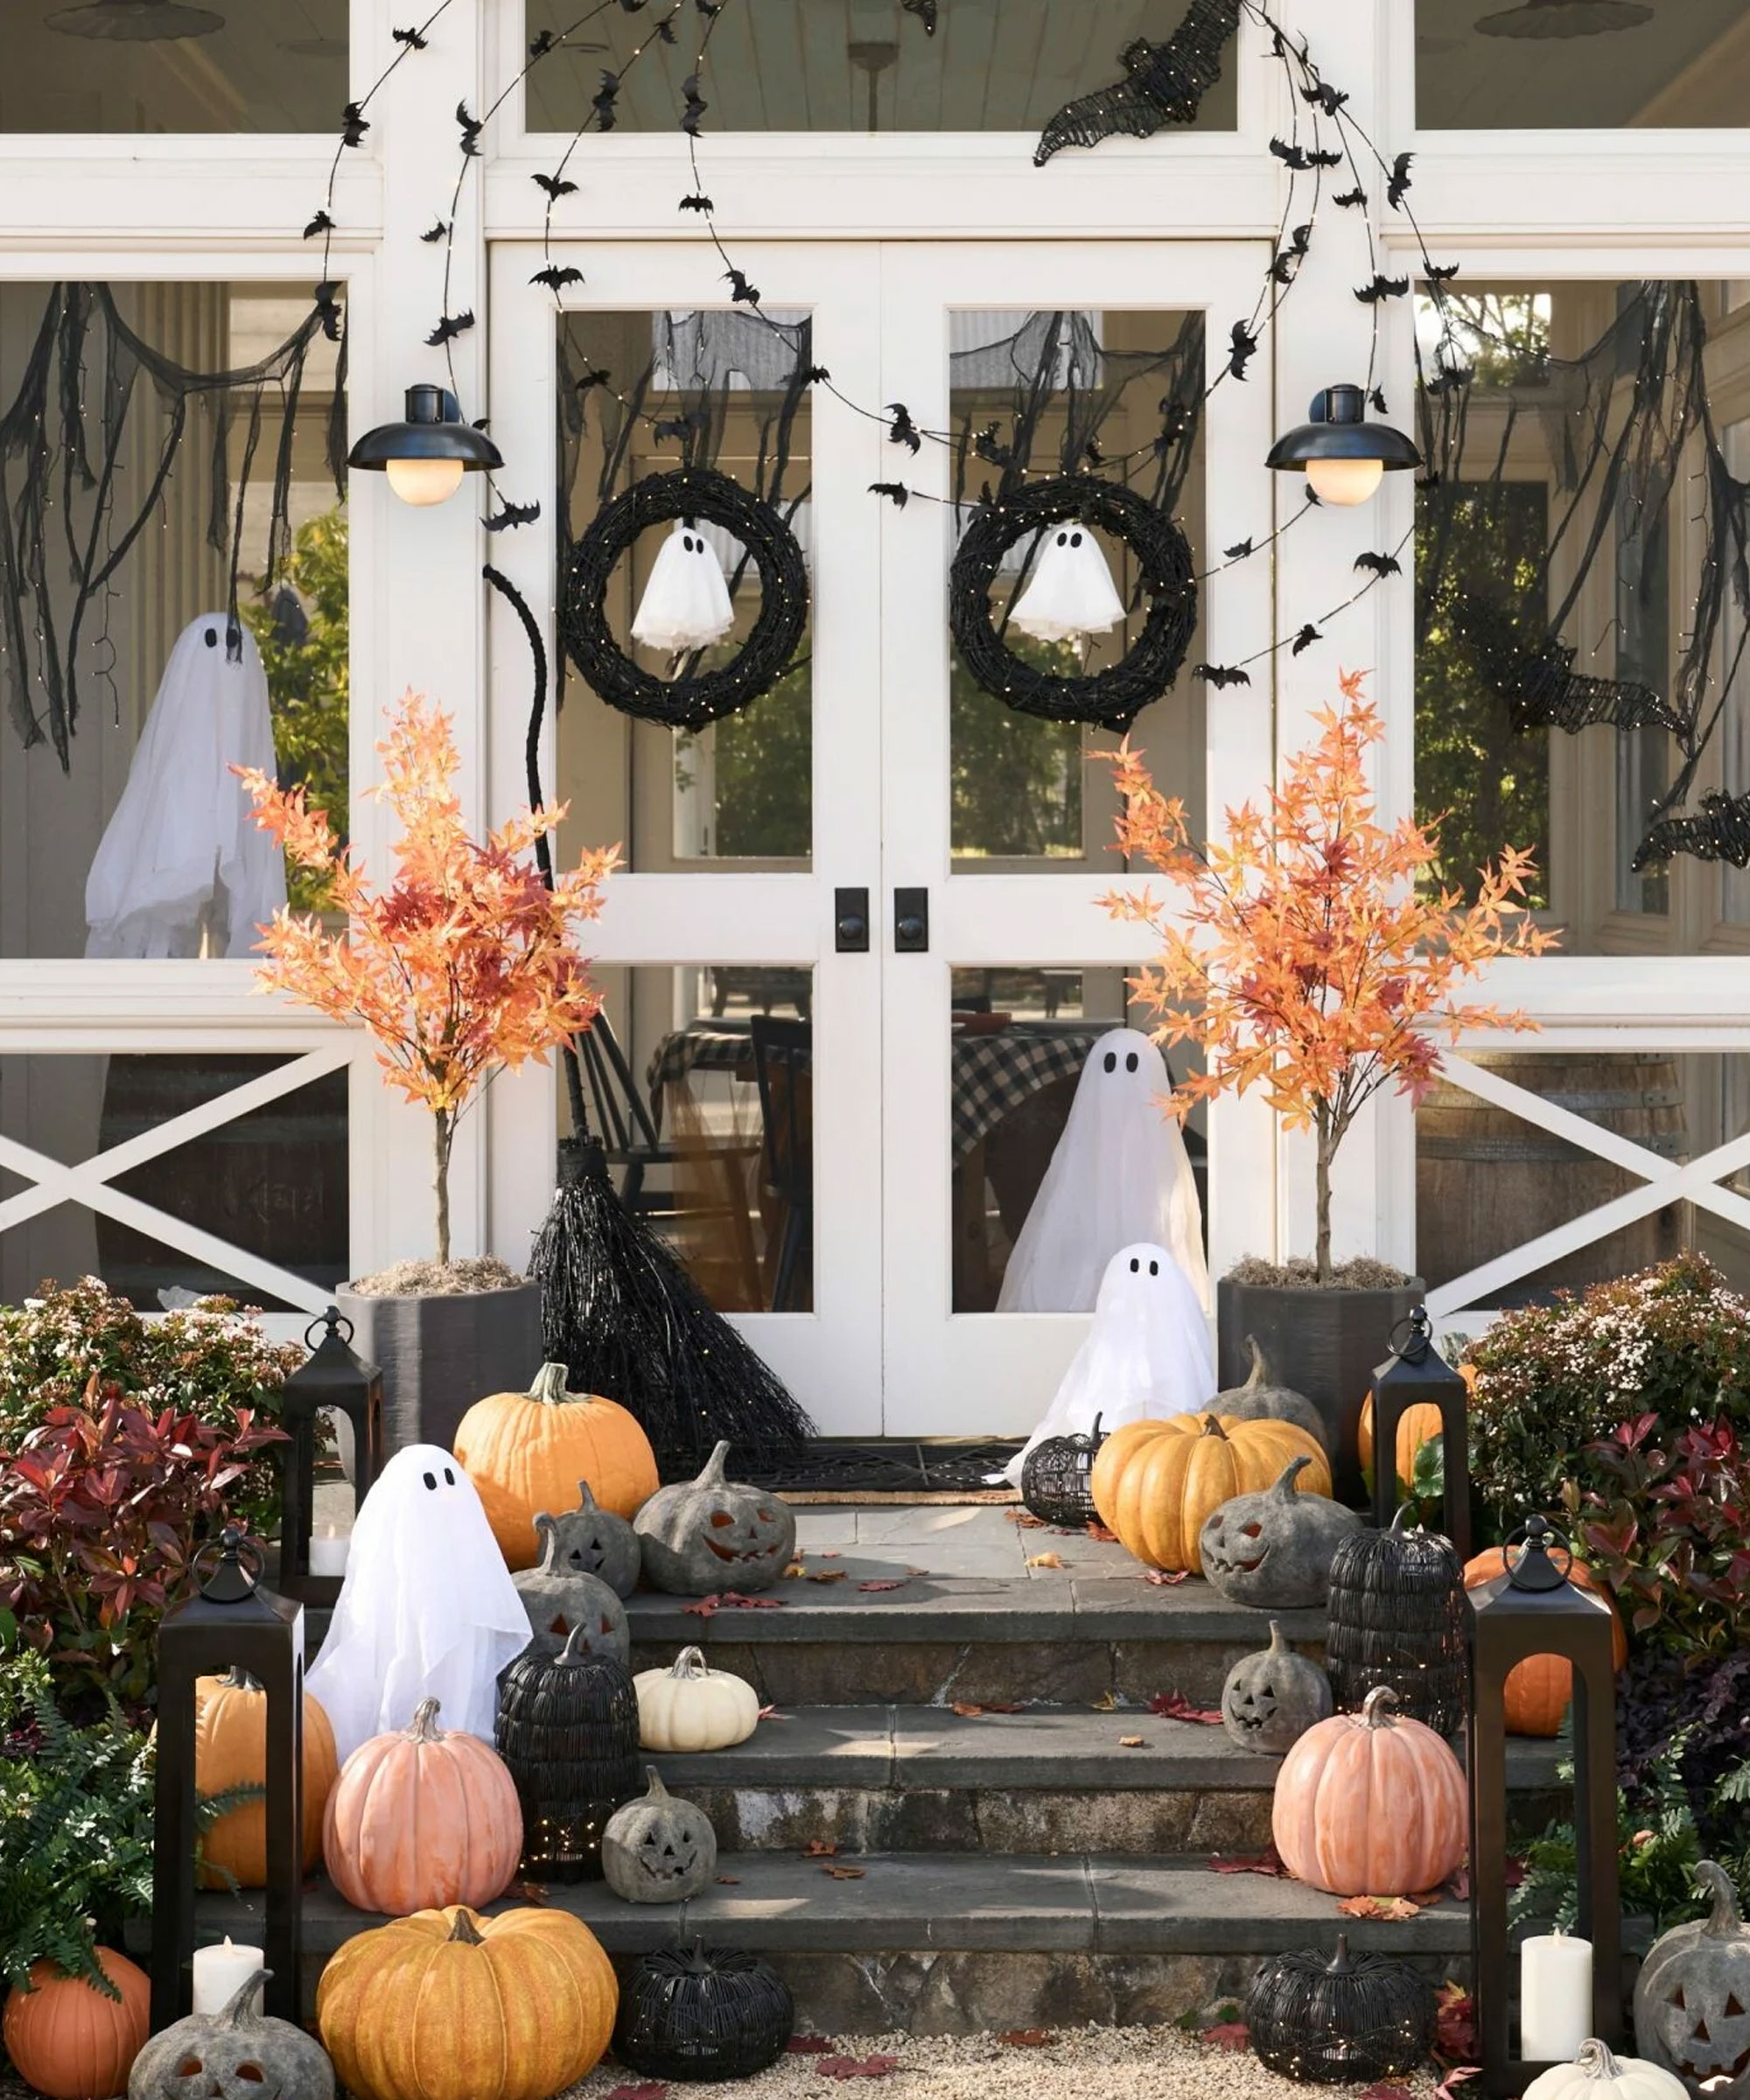 5 Halloween HOA decorating rules to check this spooky season